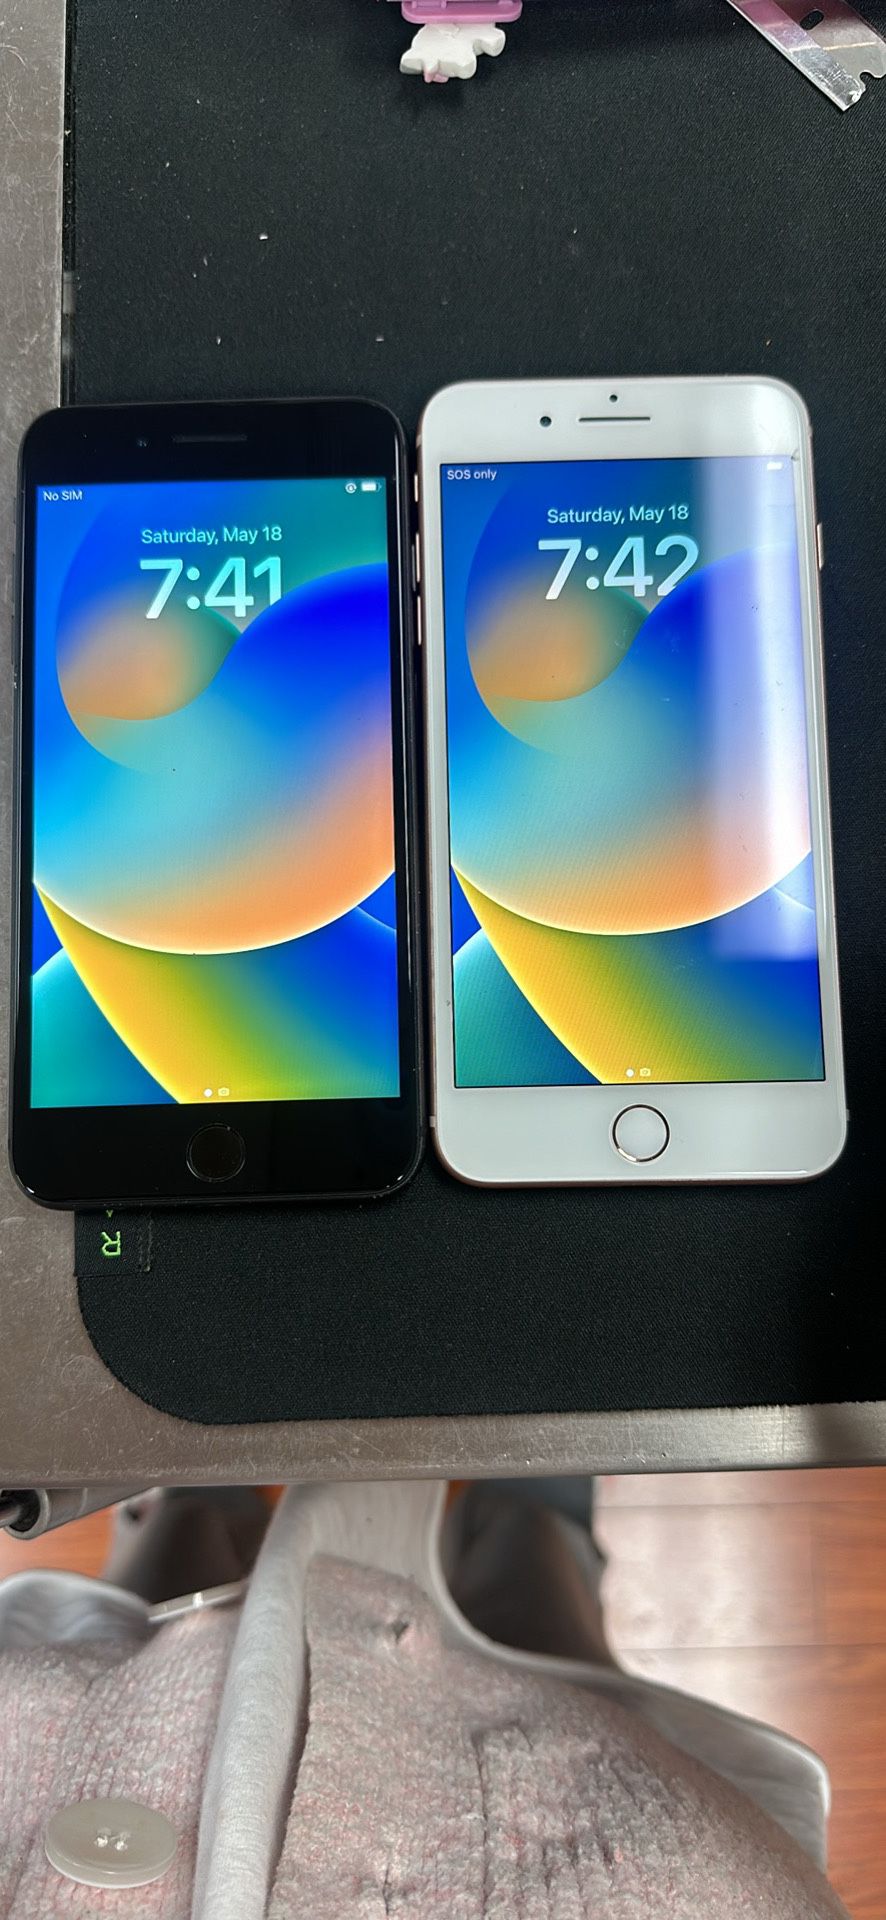 iPhone 8 Plus 64GB unlocked.2 in a bundle for sale at a low price.